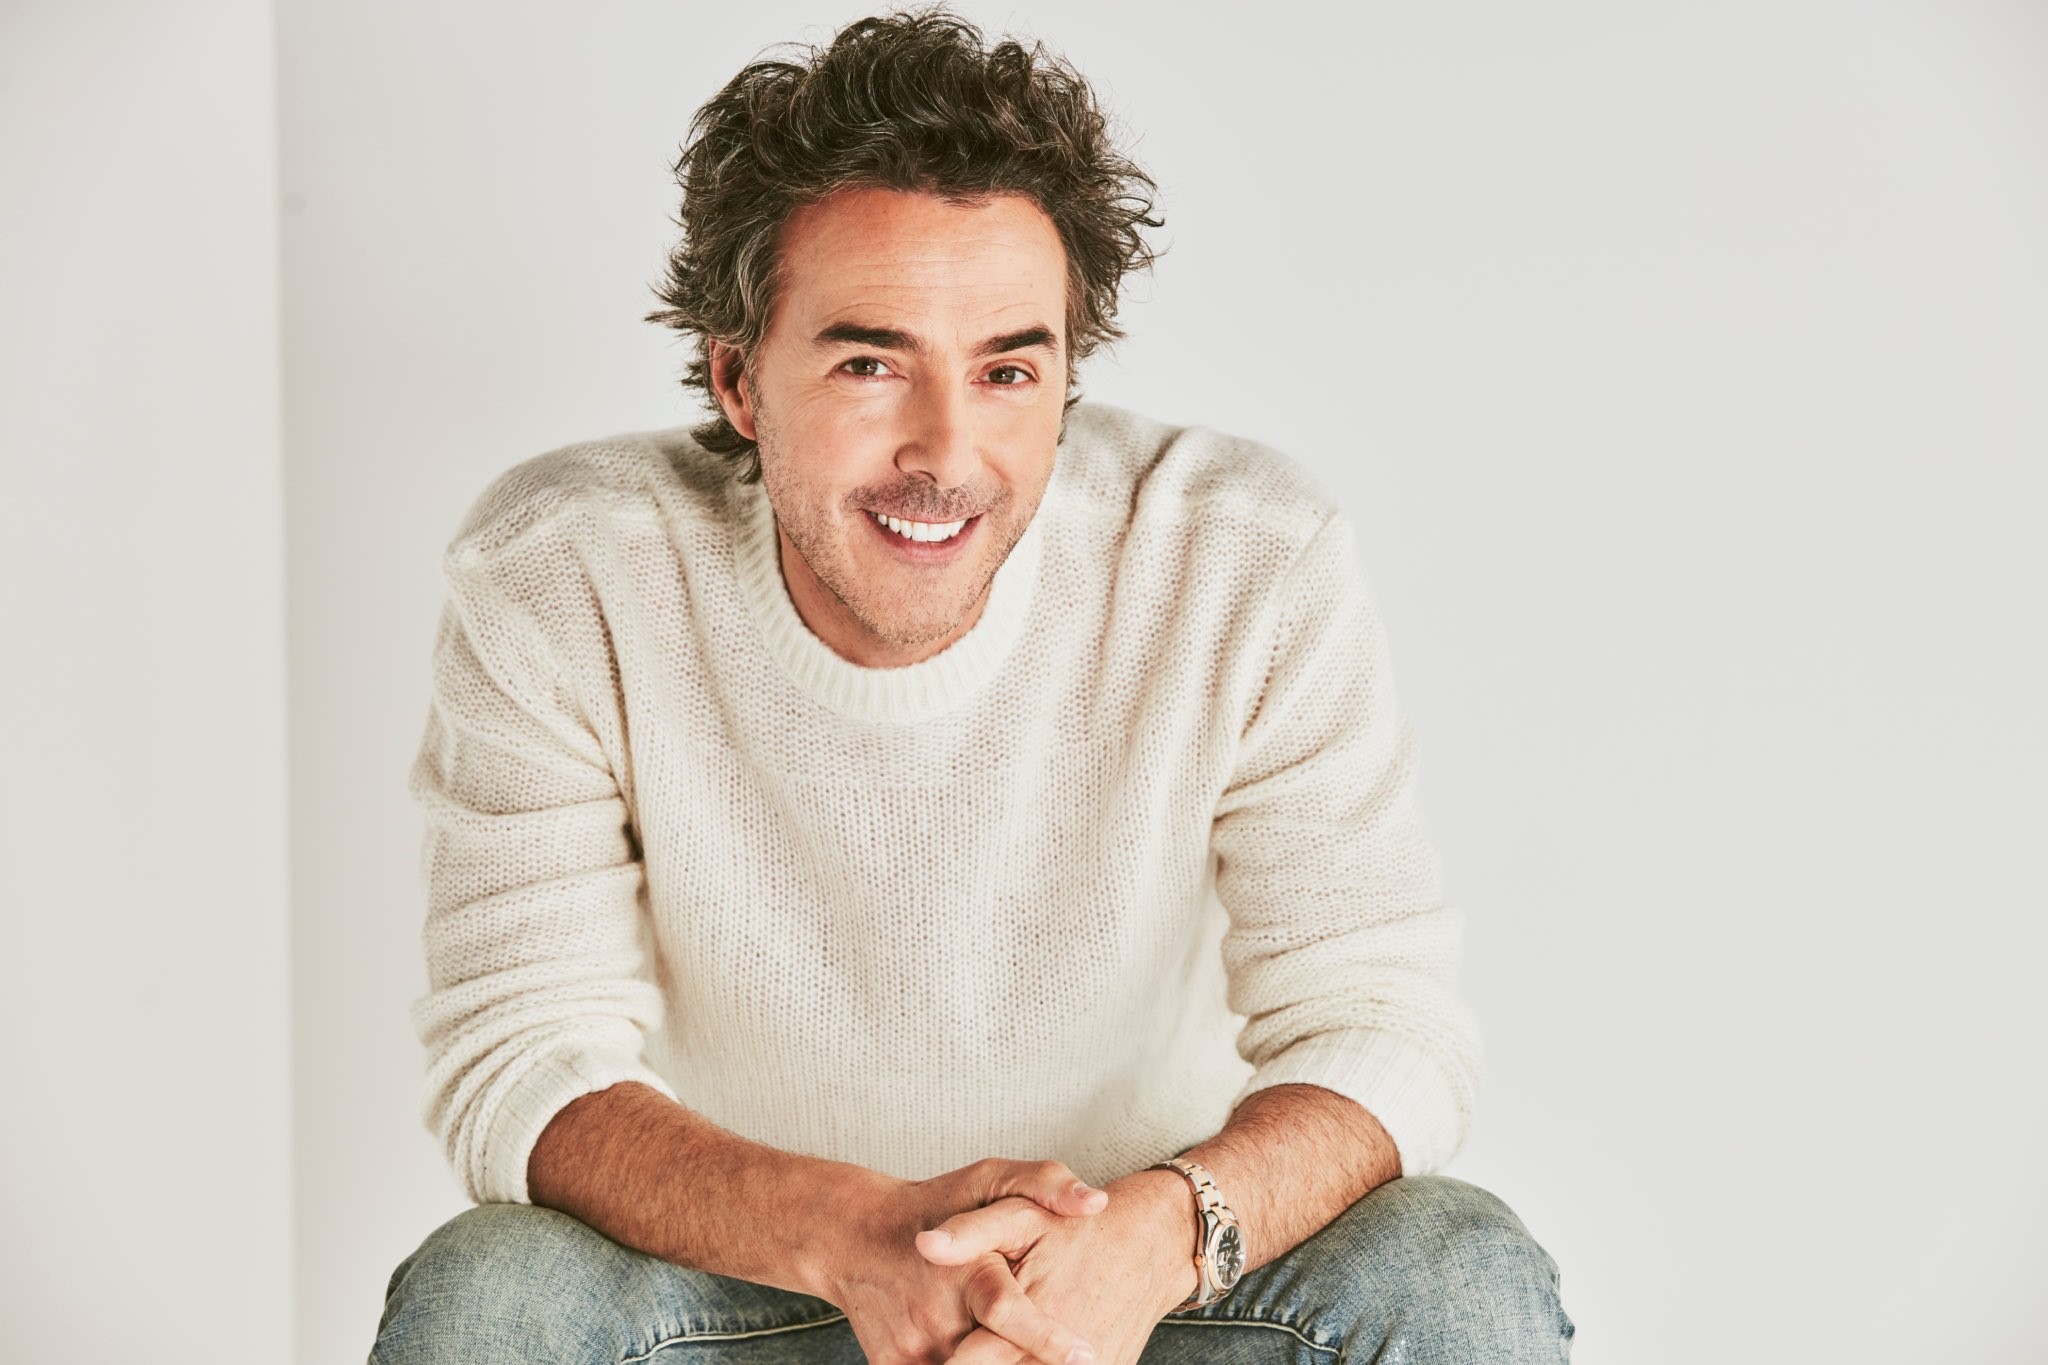 Shawn Levy, a man with shaggy brown hair and a vibrant smile, leans forward as he sits with his arms resting on his legs.